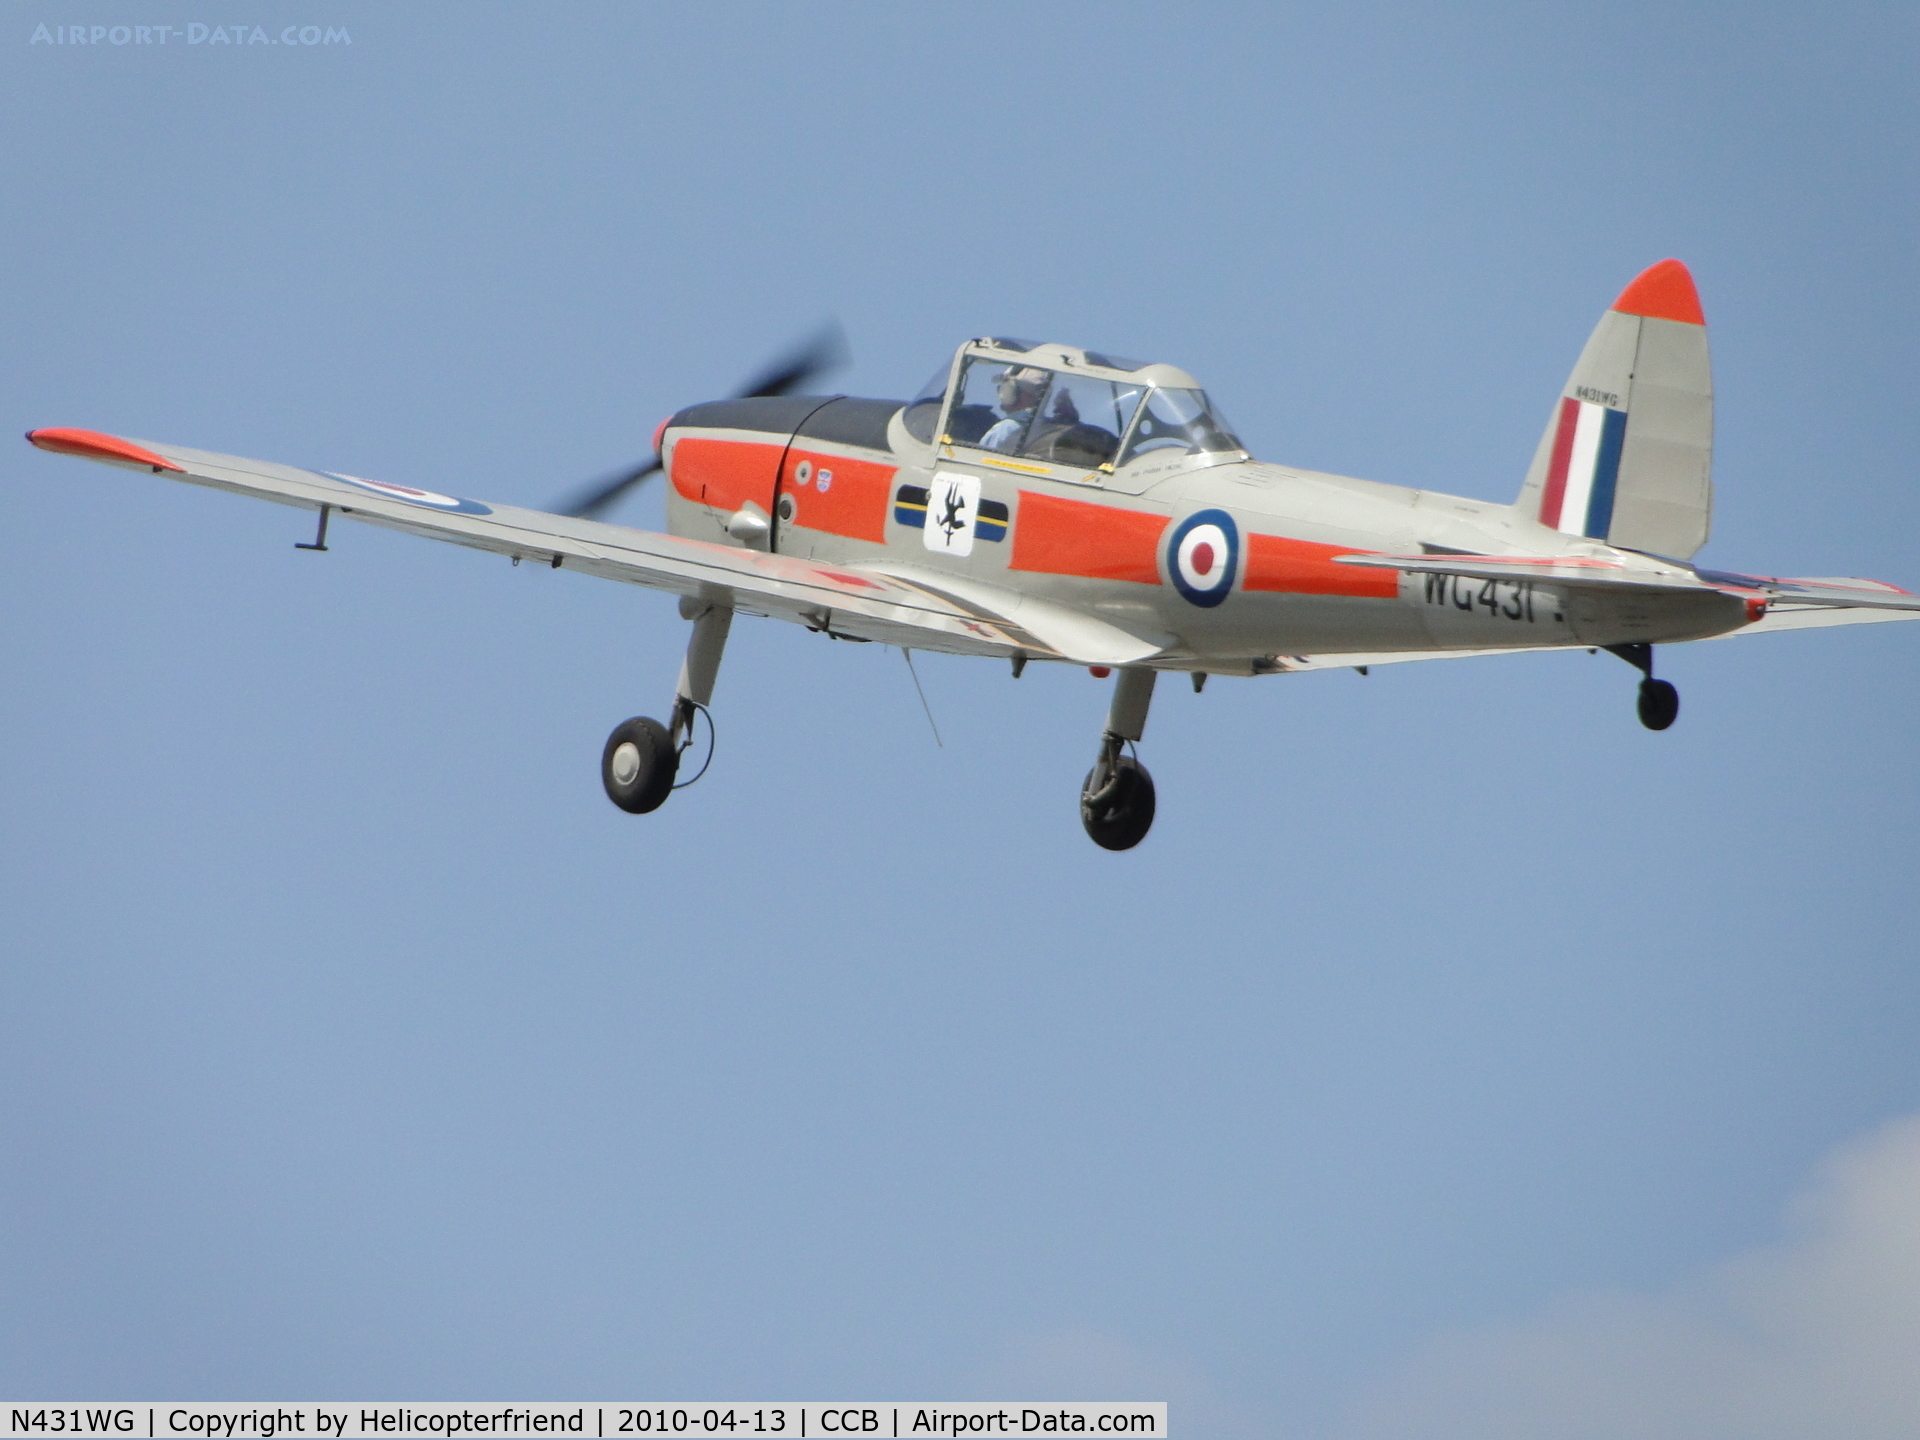 N431WG, 1951 De Havilland DHC-1 Chipmunk 22 C/N C1/0505, Airbourne and out for a flight